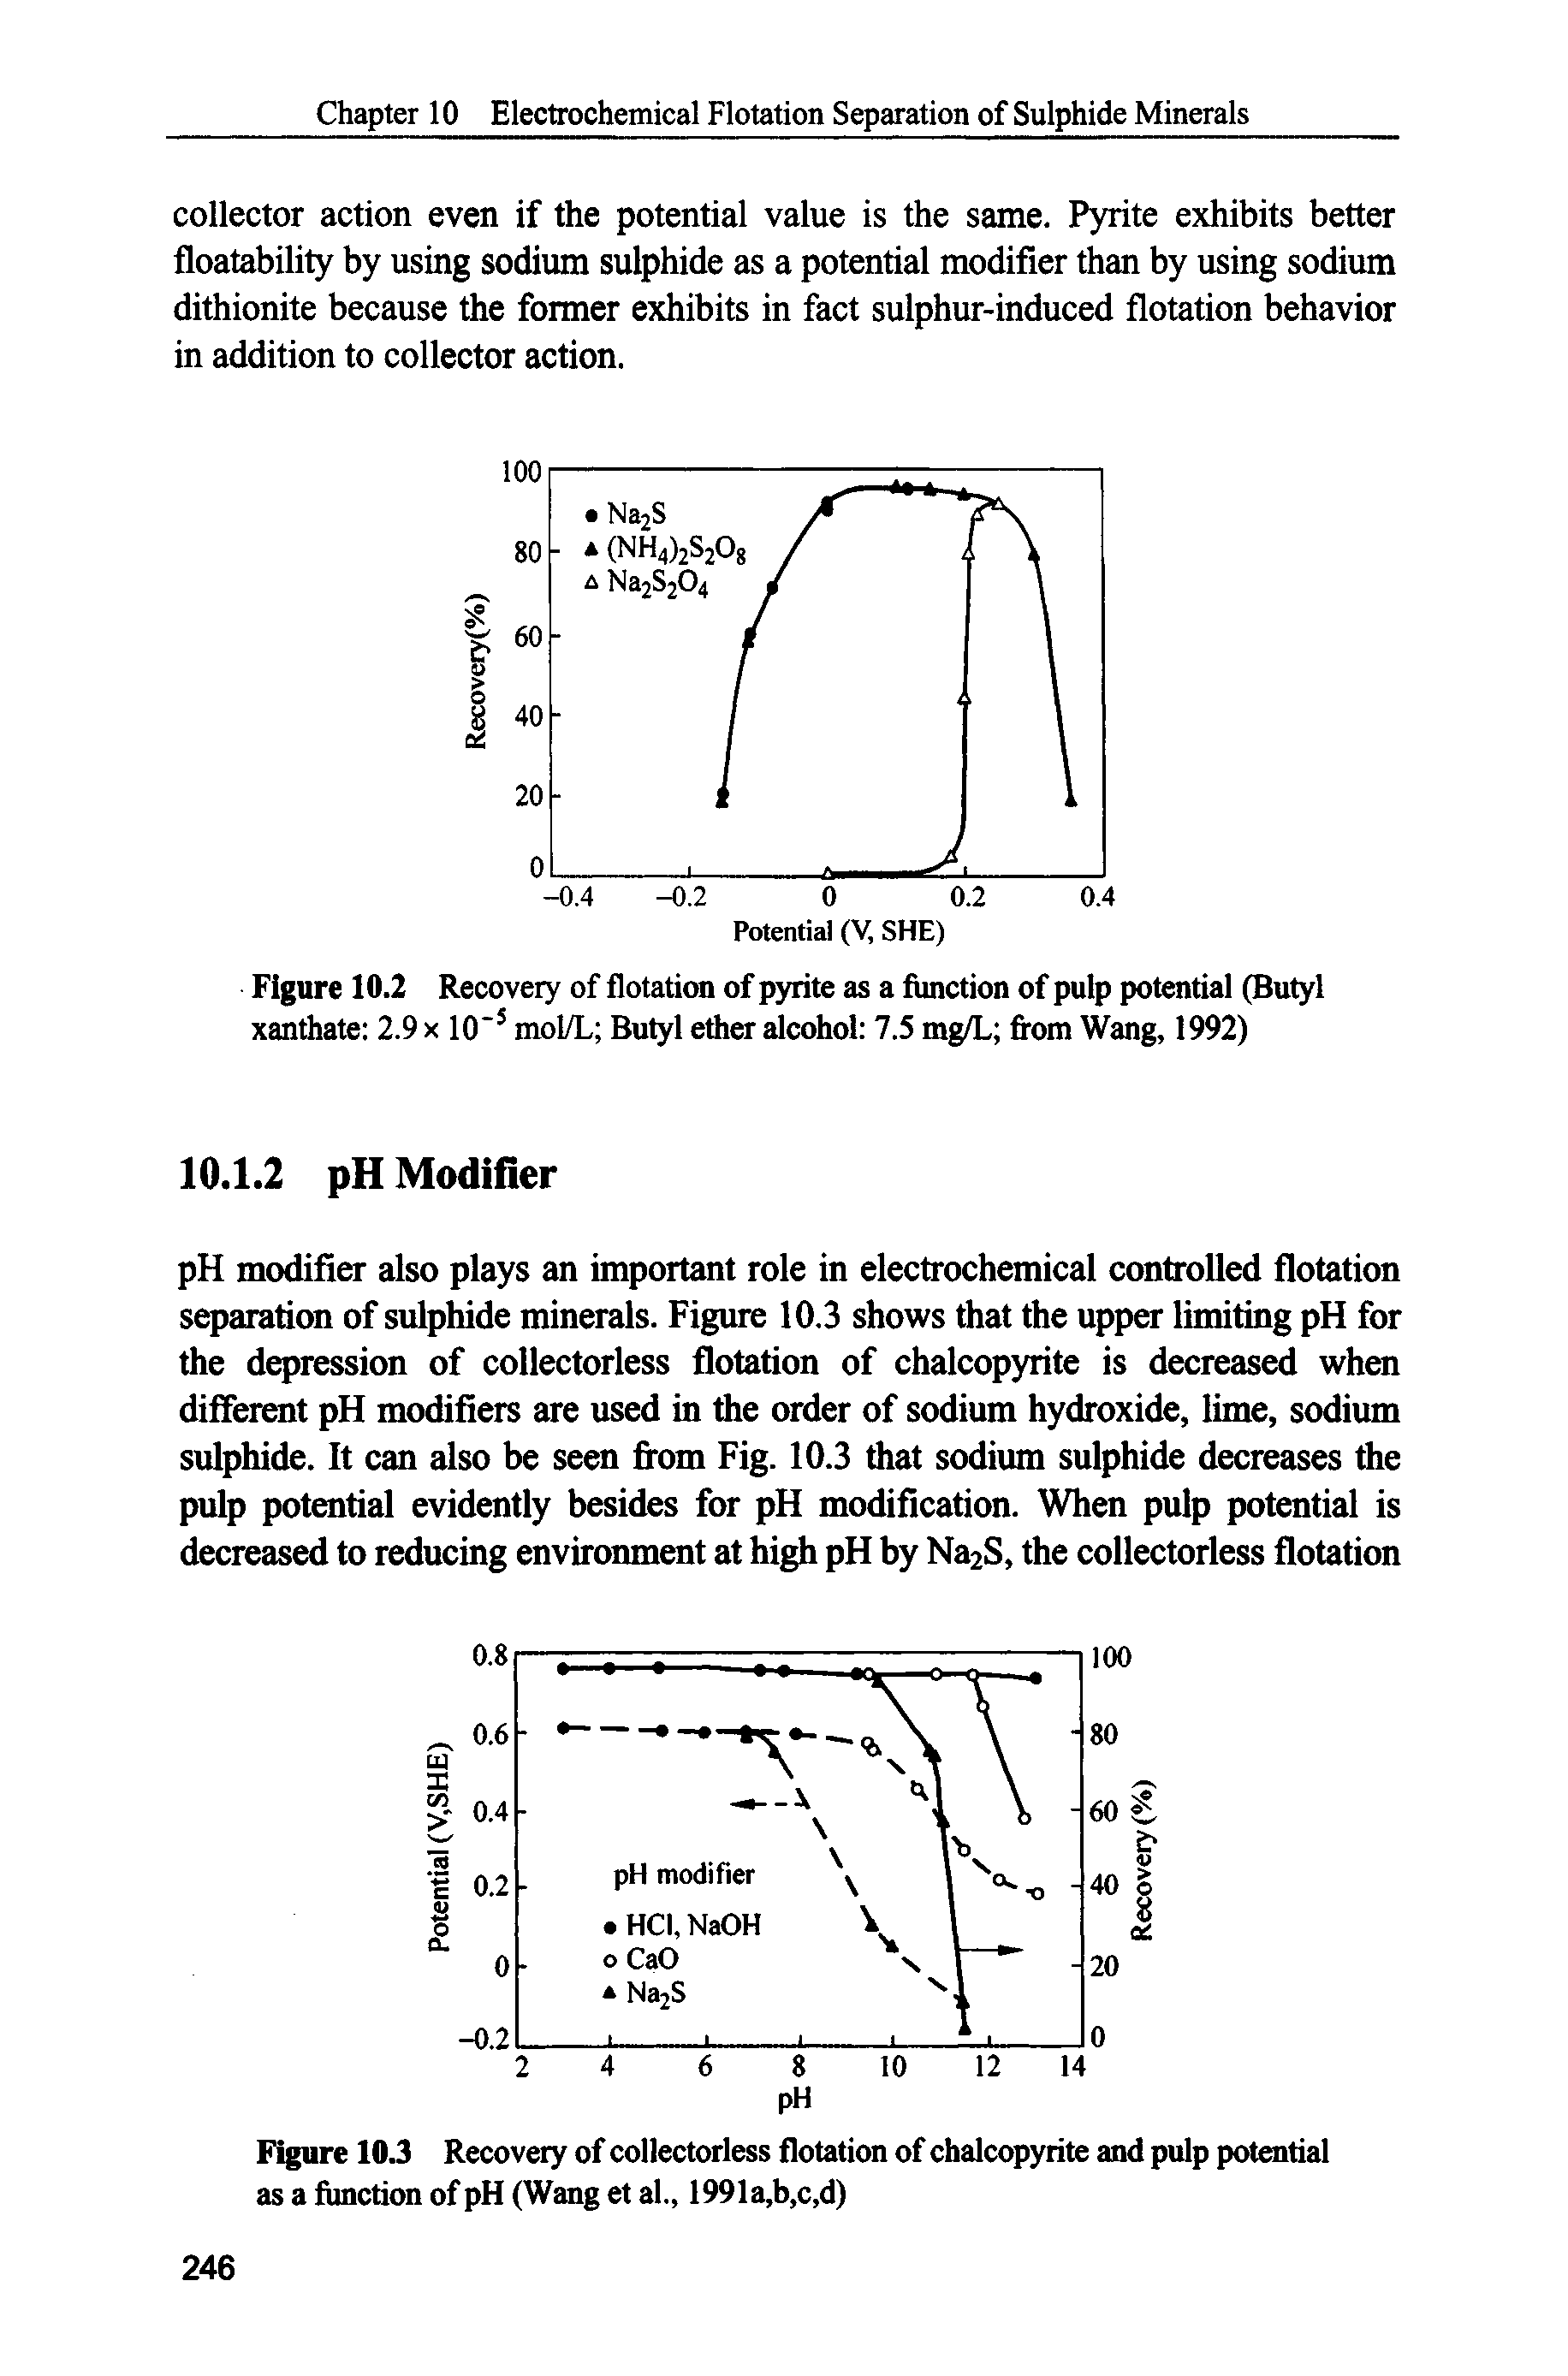 Figure 10.2 Recovery of flotation of pyrite as a function of pulp potential (Butyl xanthate 2.9 x 10 mol/L Butyl ether alcohol 7.5 mg/L from Wang, 1992)...